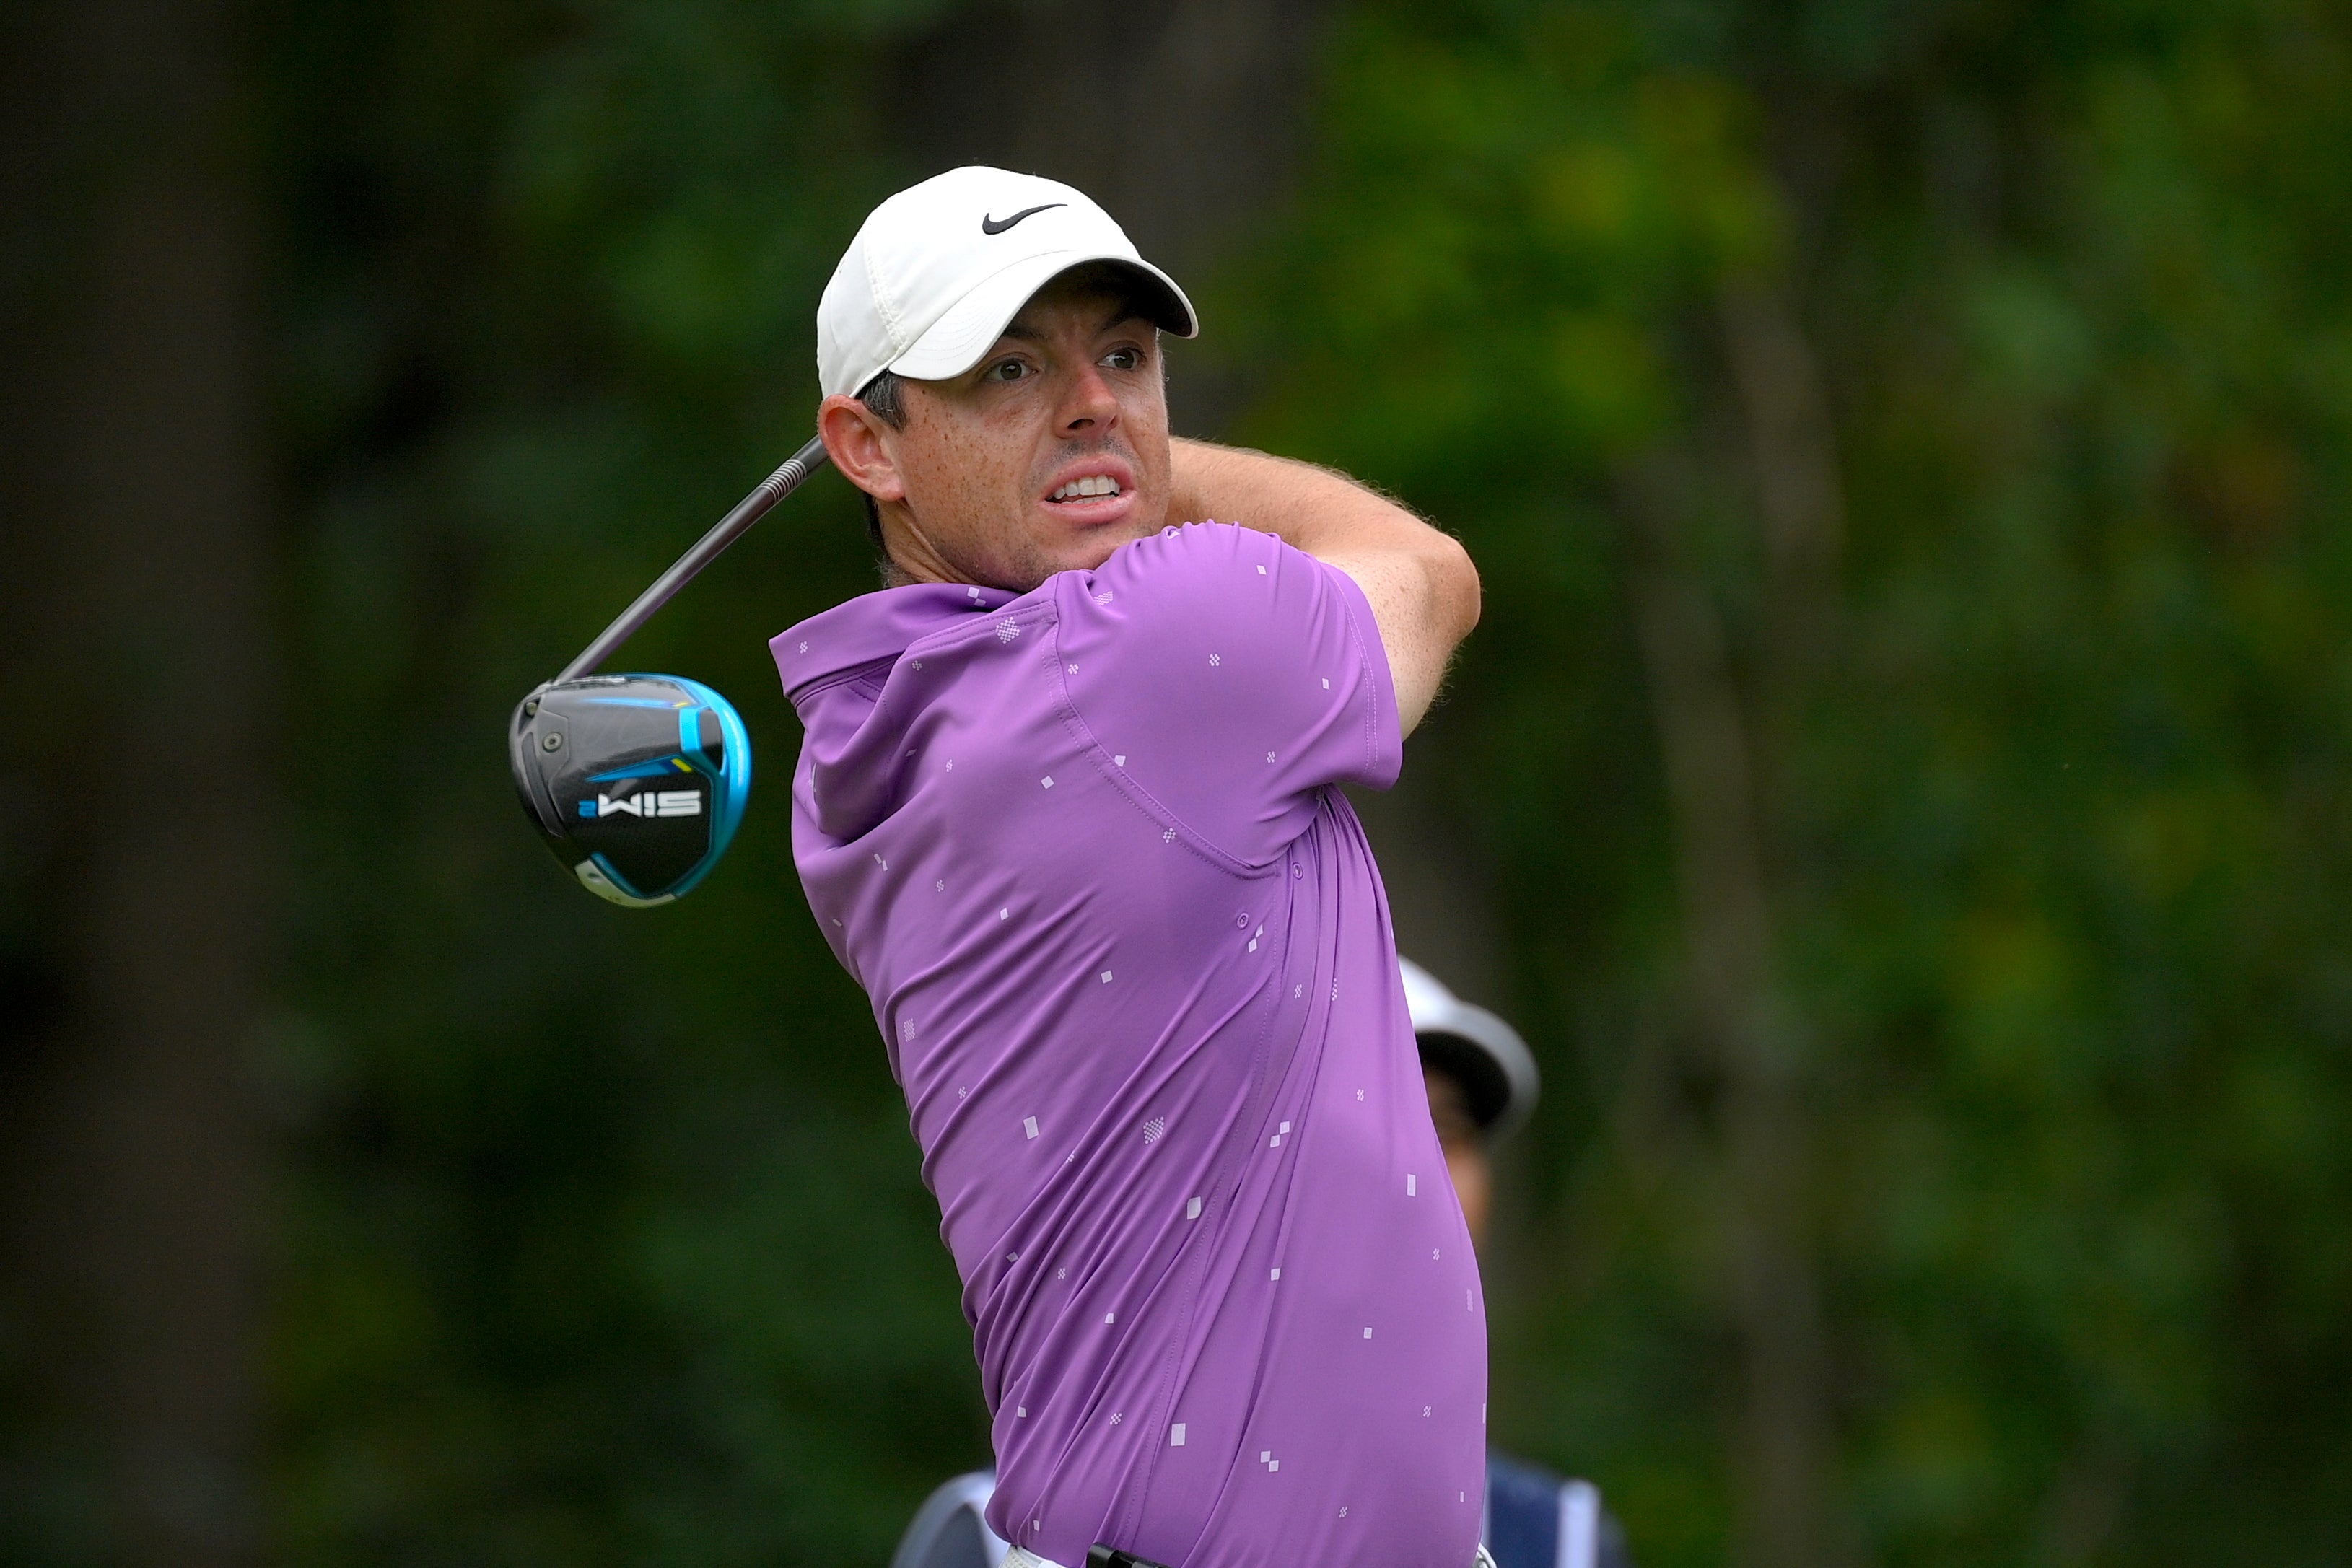 Rory McIlroy goes into the Tour Championship after shooting 22 under par in the BMW Championship (Nick Wass/AP)